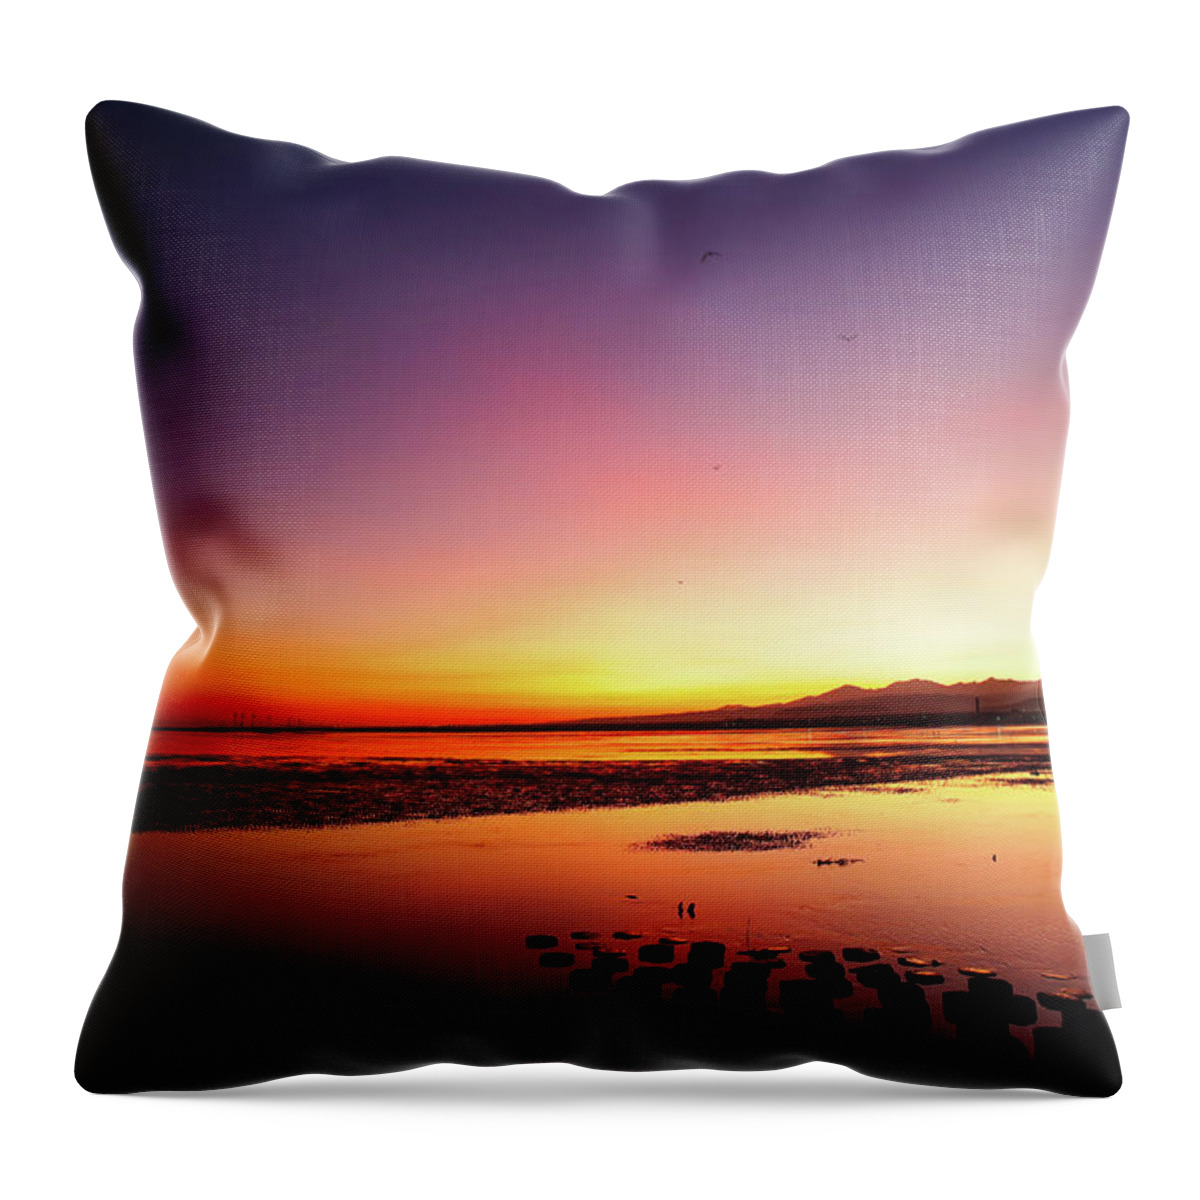 Tranquility Throw Pillow featuring the photograph Flying Birds Into The Rays At Dusk by Thunderbolt tw (bai Heng-yao) Photography